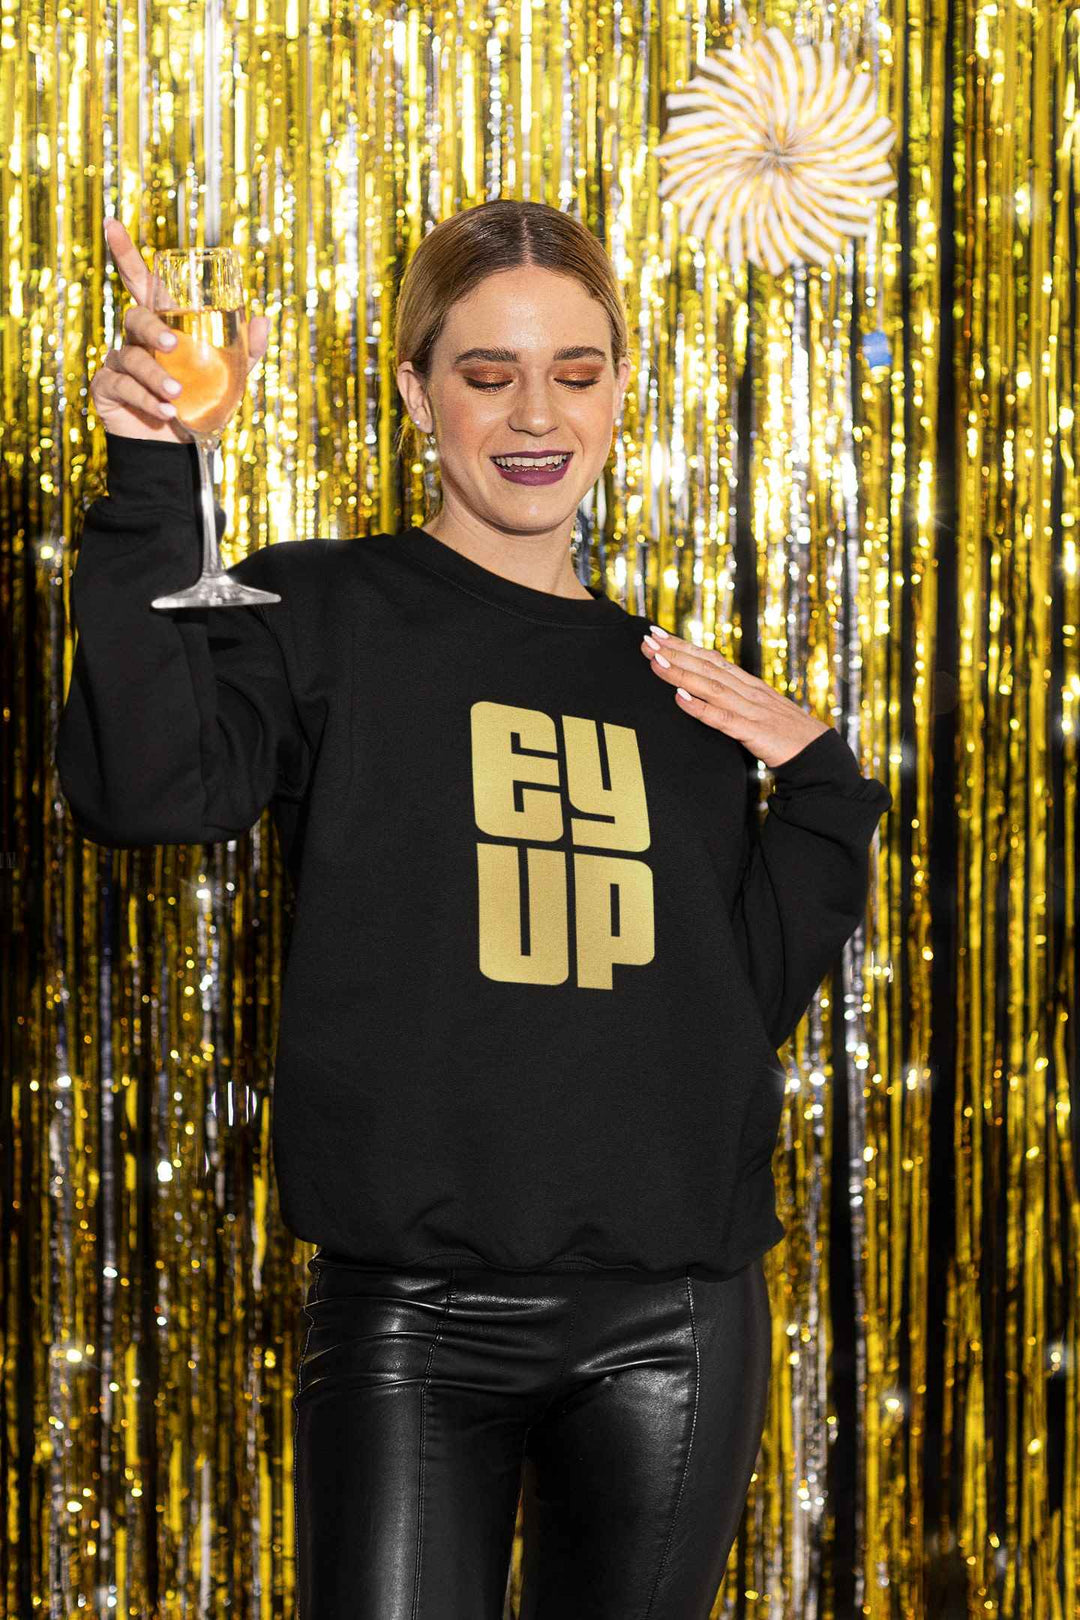 EY UP Party Sweater